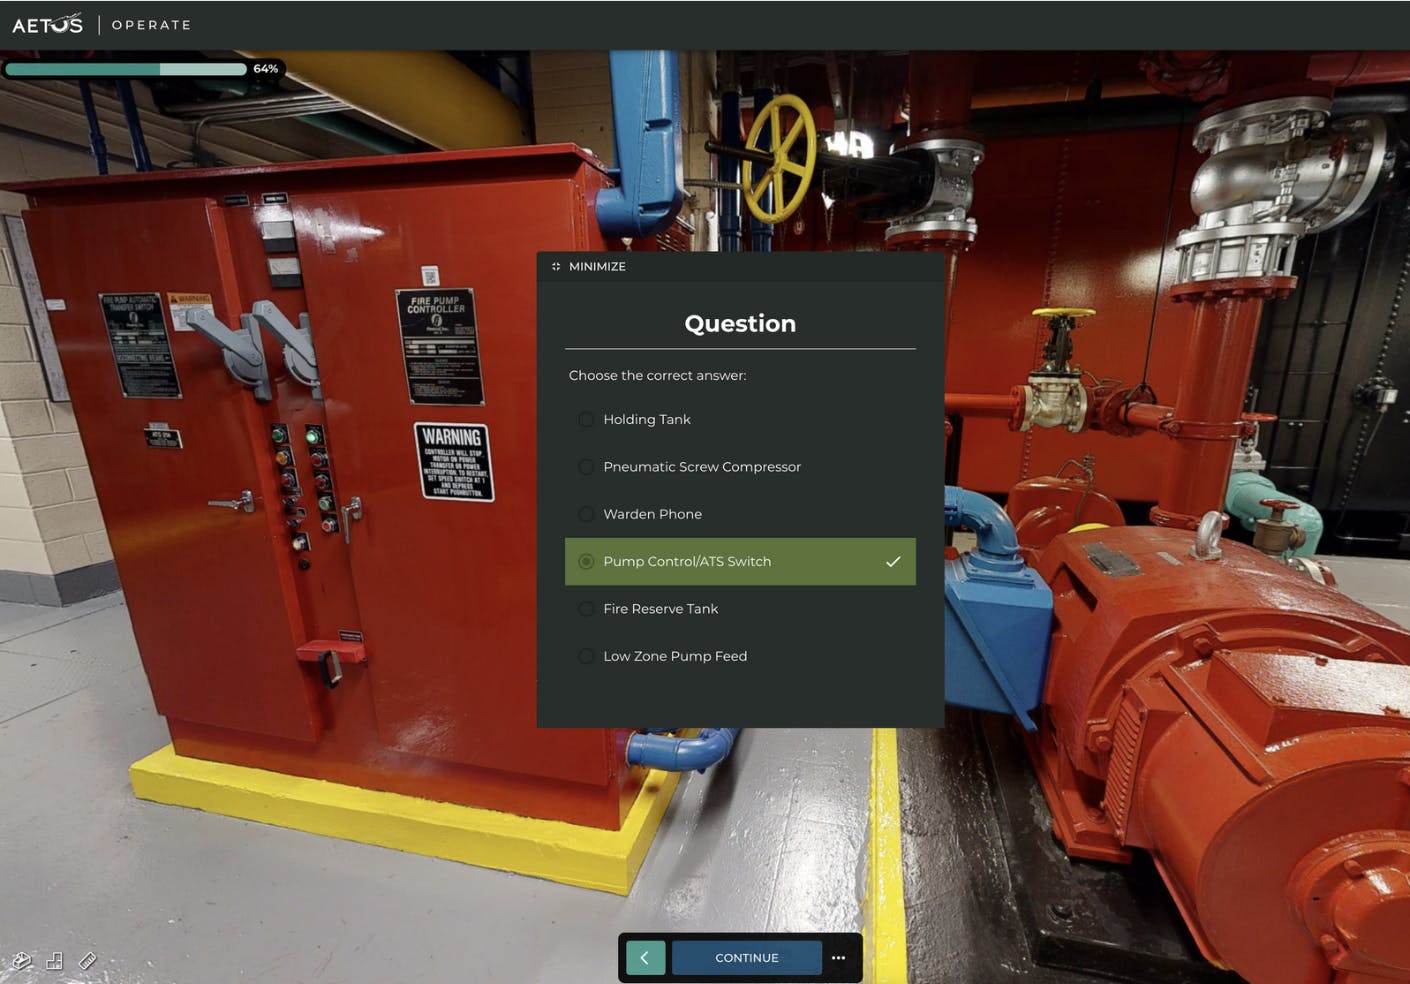 With Aetos Imaging's Site-Specific Training feature, you can give assessments and run reports on the institutional knowledge your workers have: like this question asking an employee to identify a pump control system in their facility.